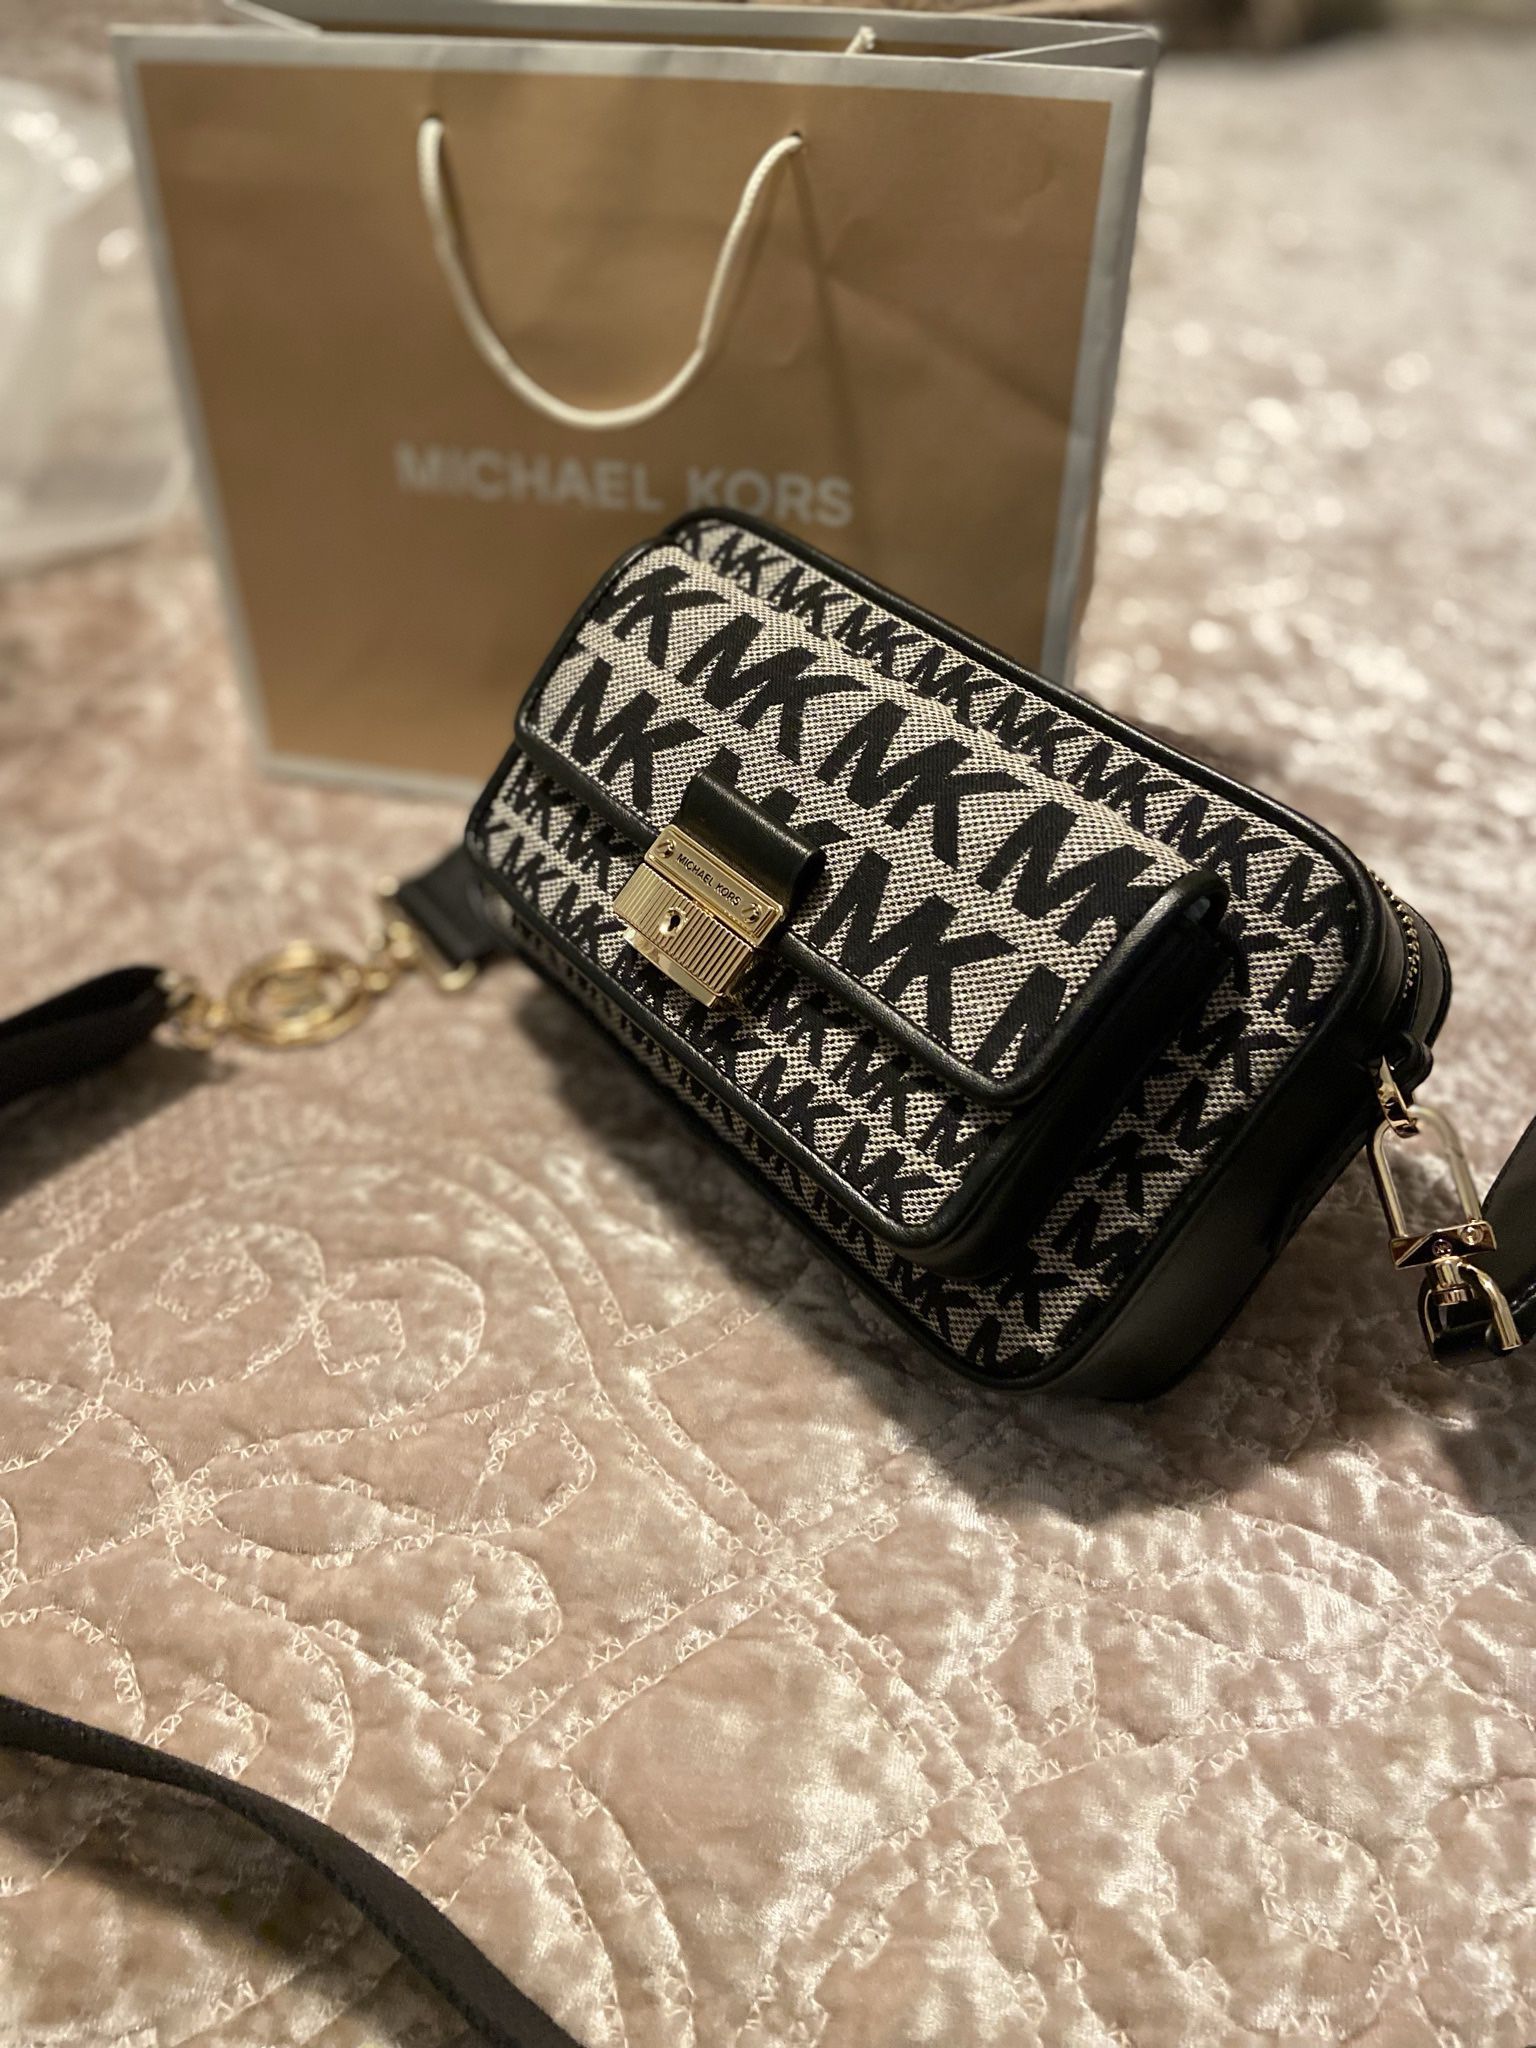 New Michael Kors Crossbody Monogram Thick Strap for Sale in Long Beach, CA  - OfferUp